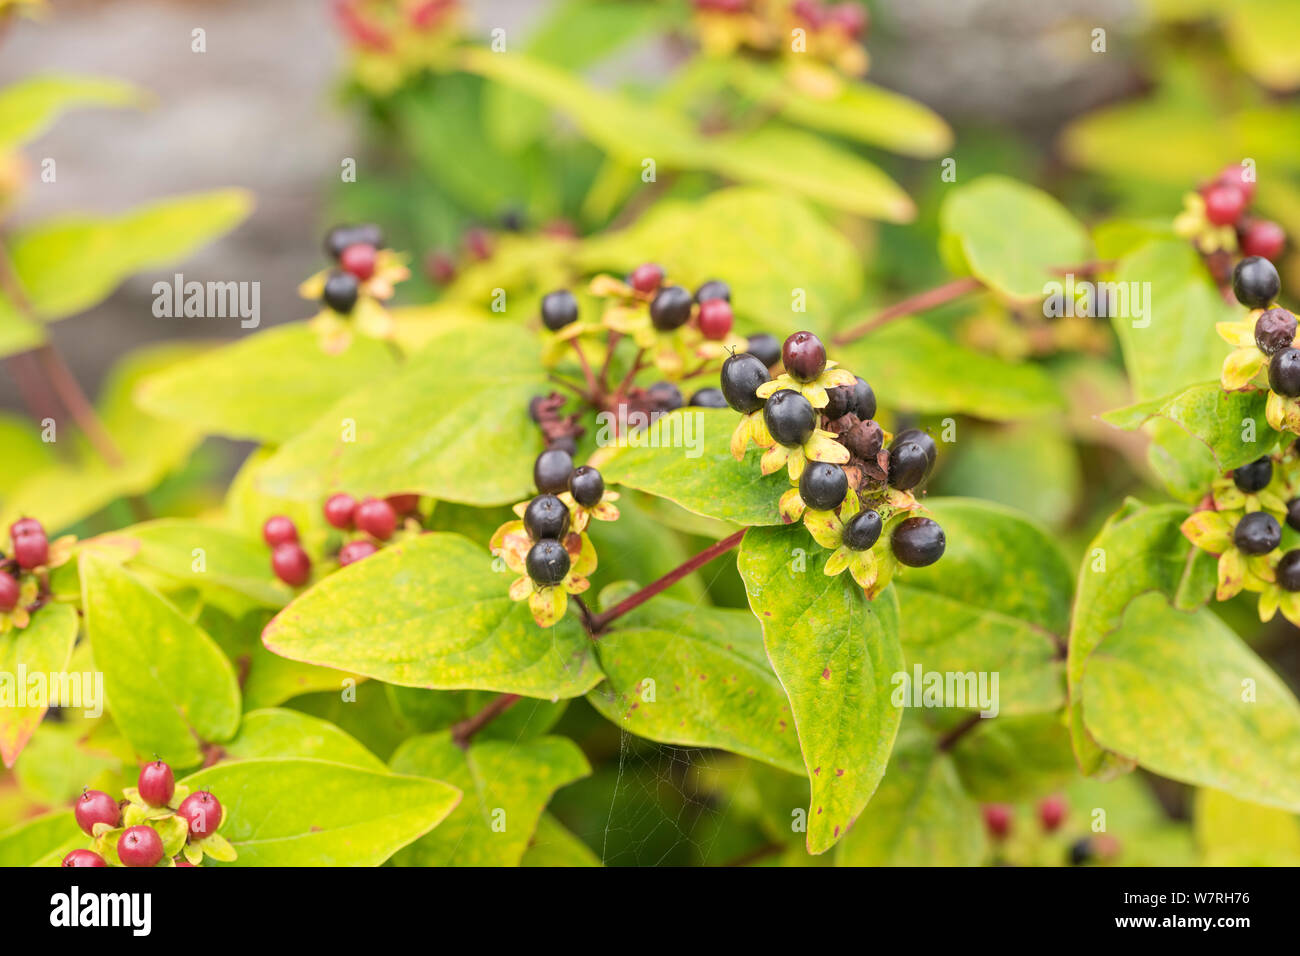 Leaves and black berries of Tutsan / Hypericum androsaemum. Tutsan was used as a medicinal herbal wound plant, and is related to St. John's Wort. Stock Photo